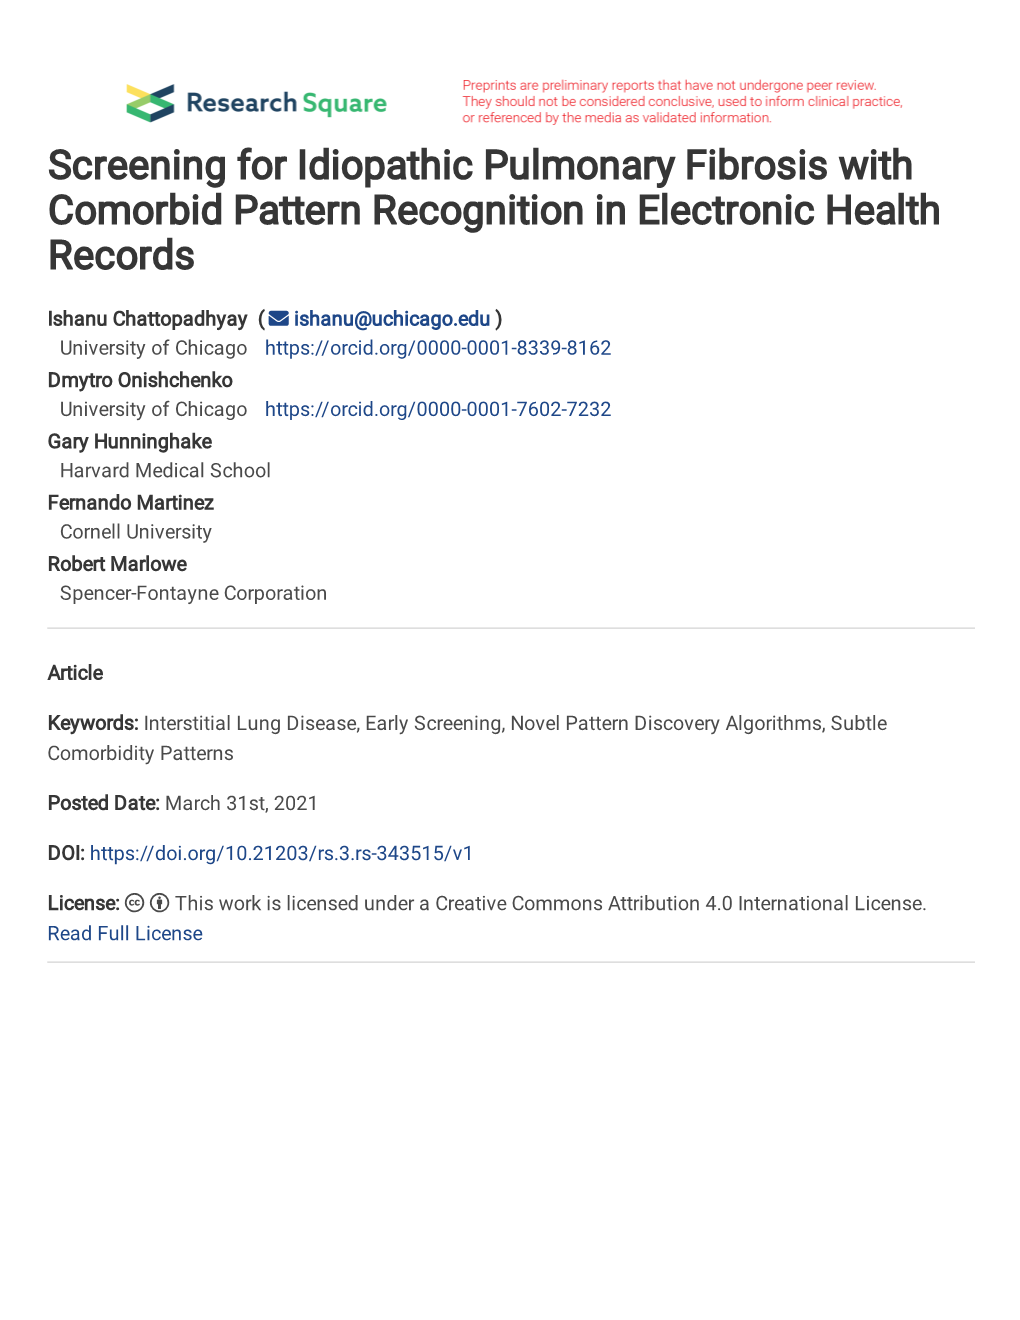 Screening for Idiopathic Pulmonary Fibrosis with Comorbid Pattern Recognition in Electronic Health Records